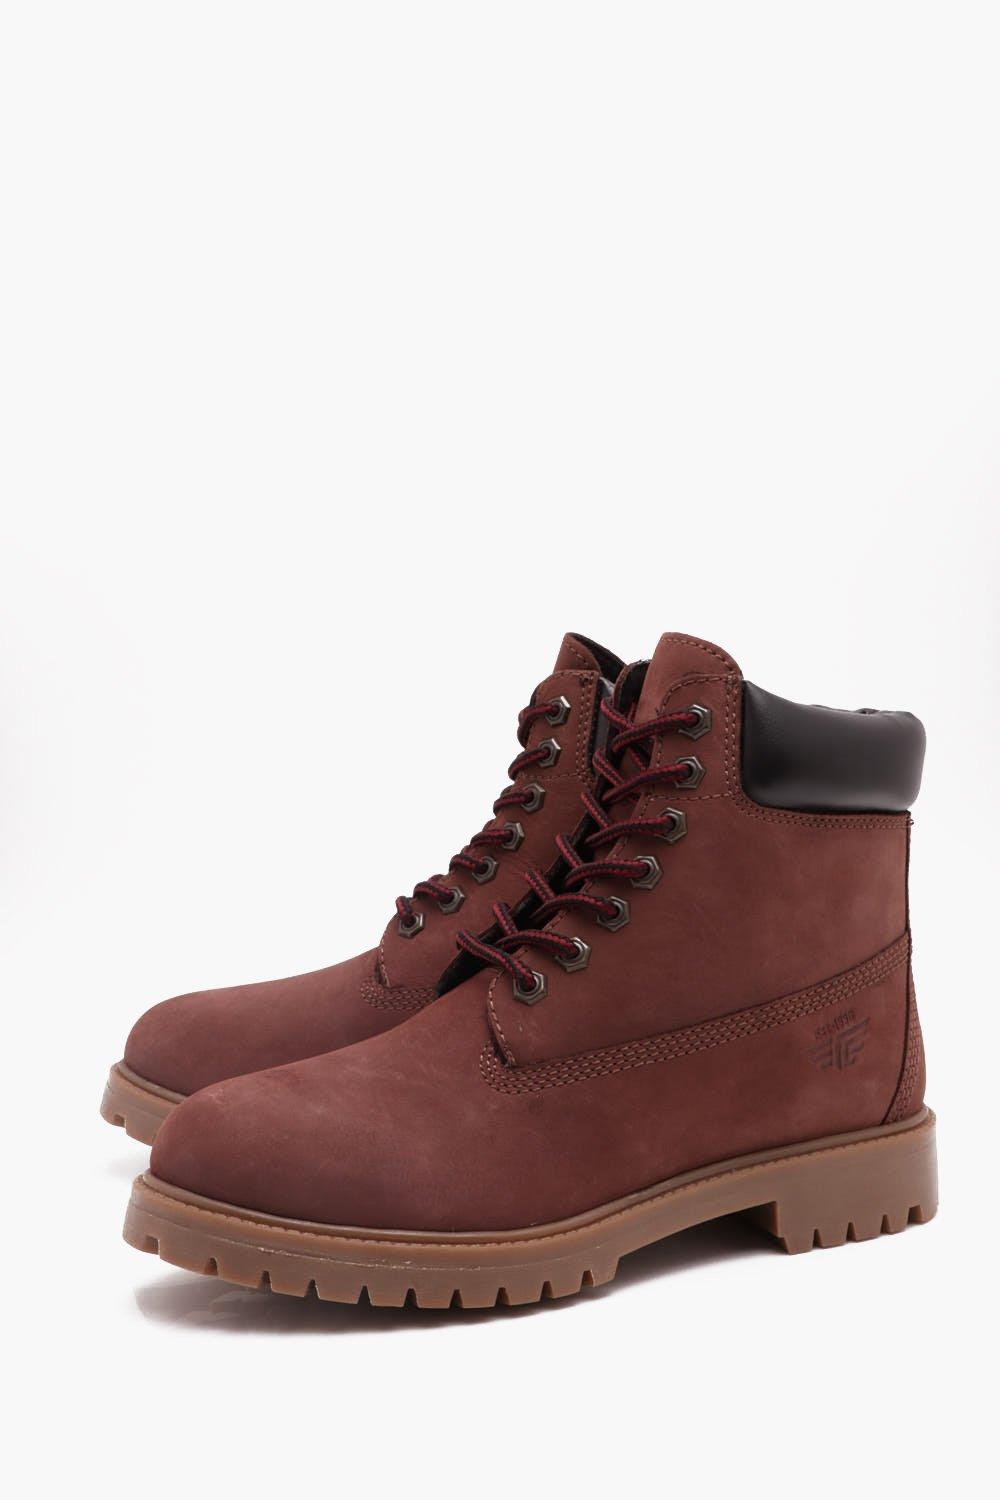 leather worker boots